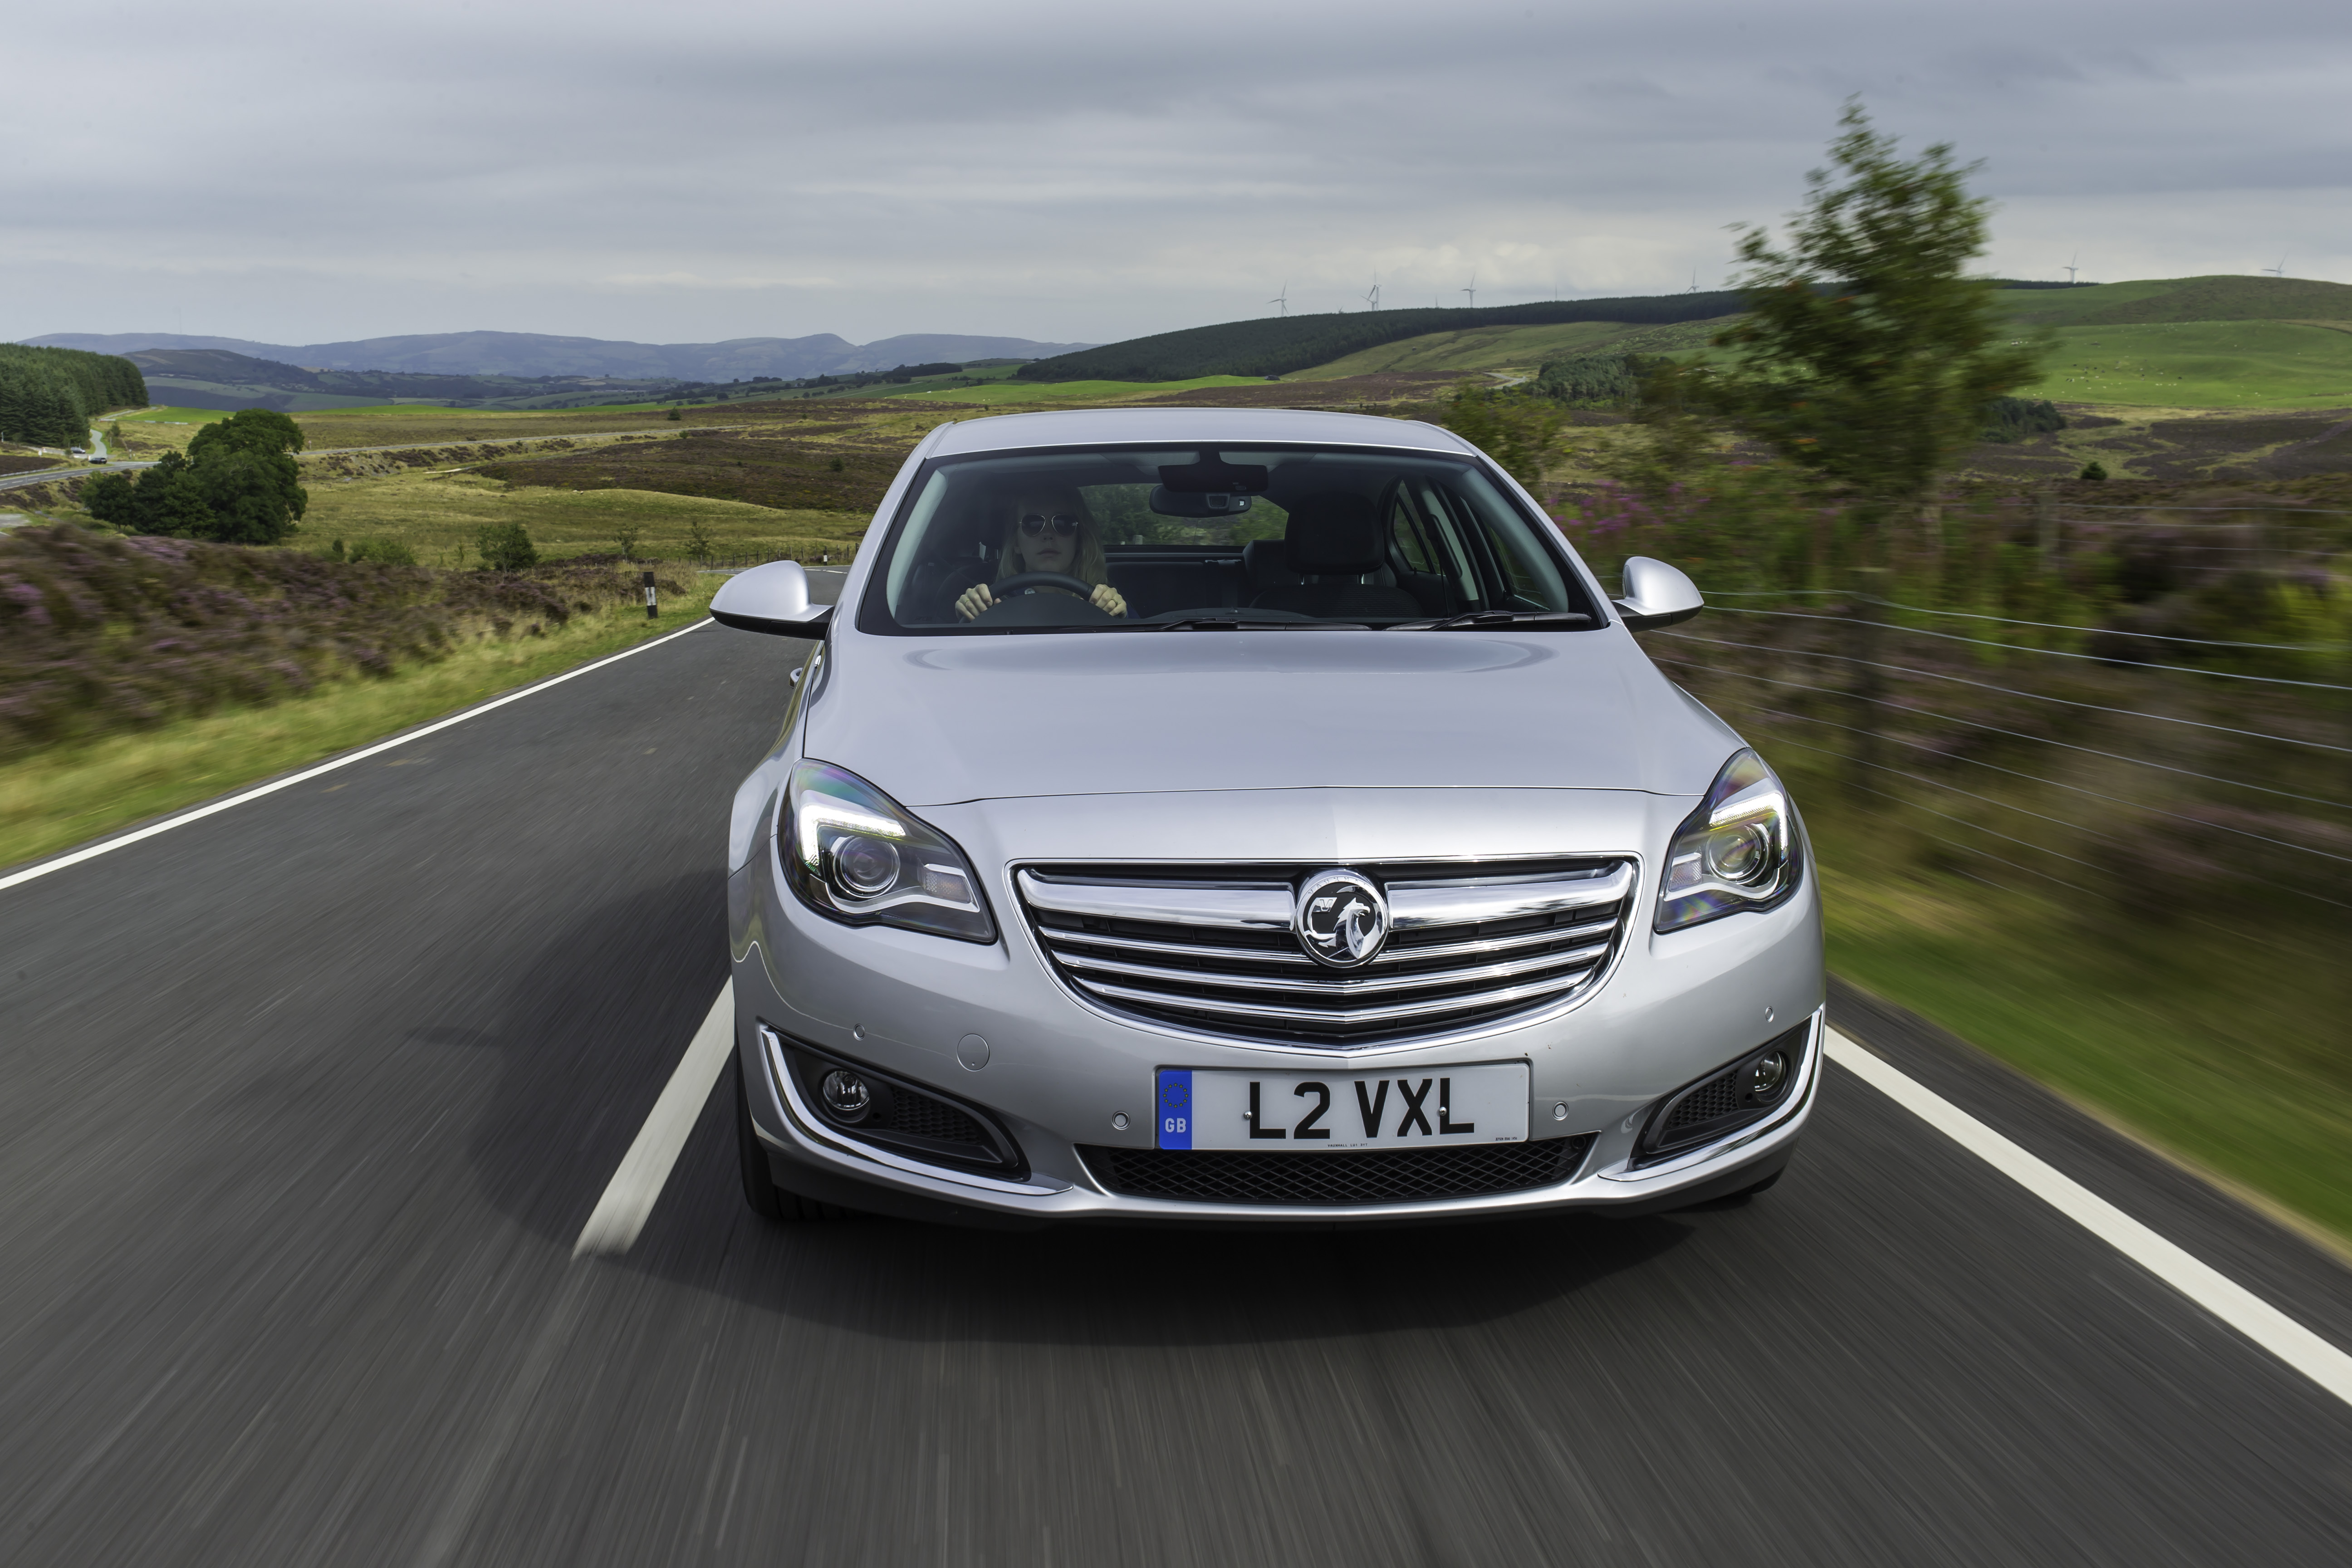 Vauxhall Insignia 13 17 Review Auto Express